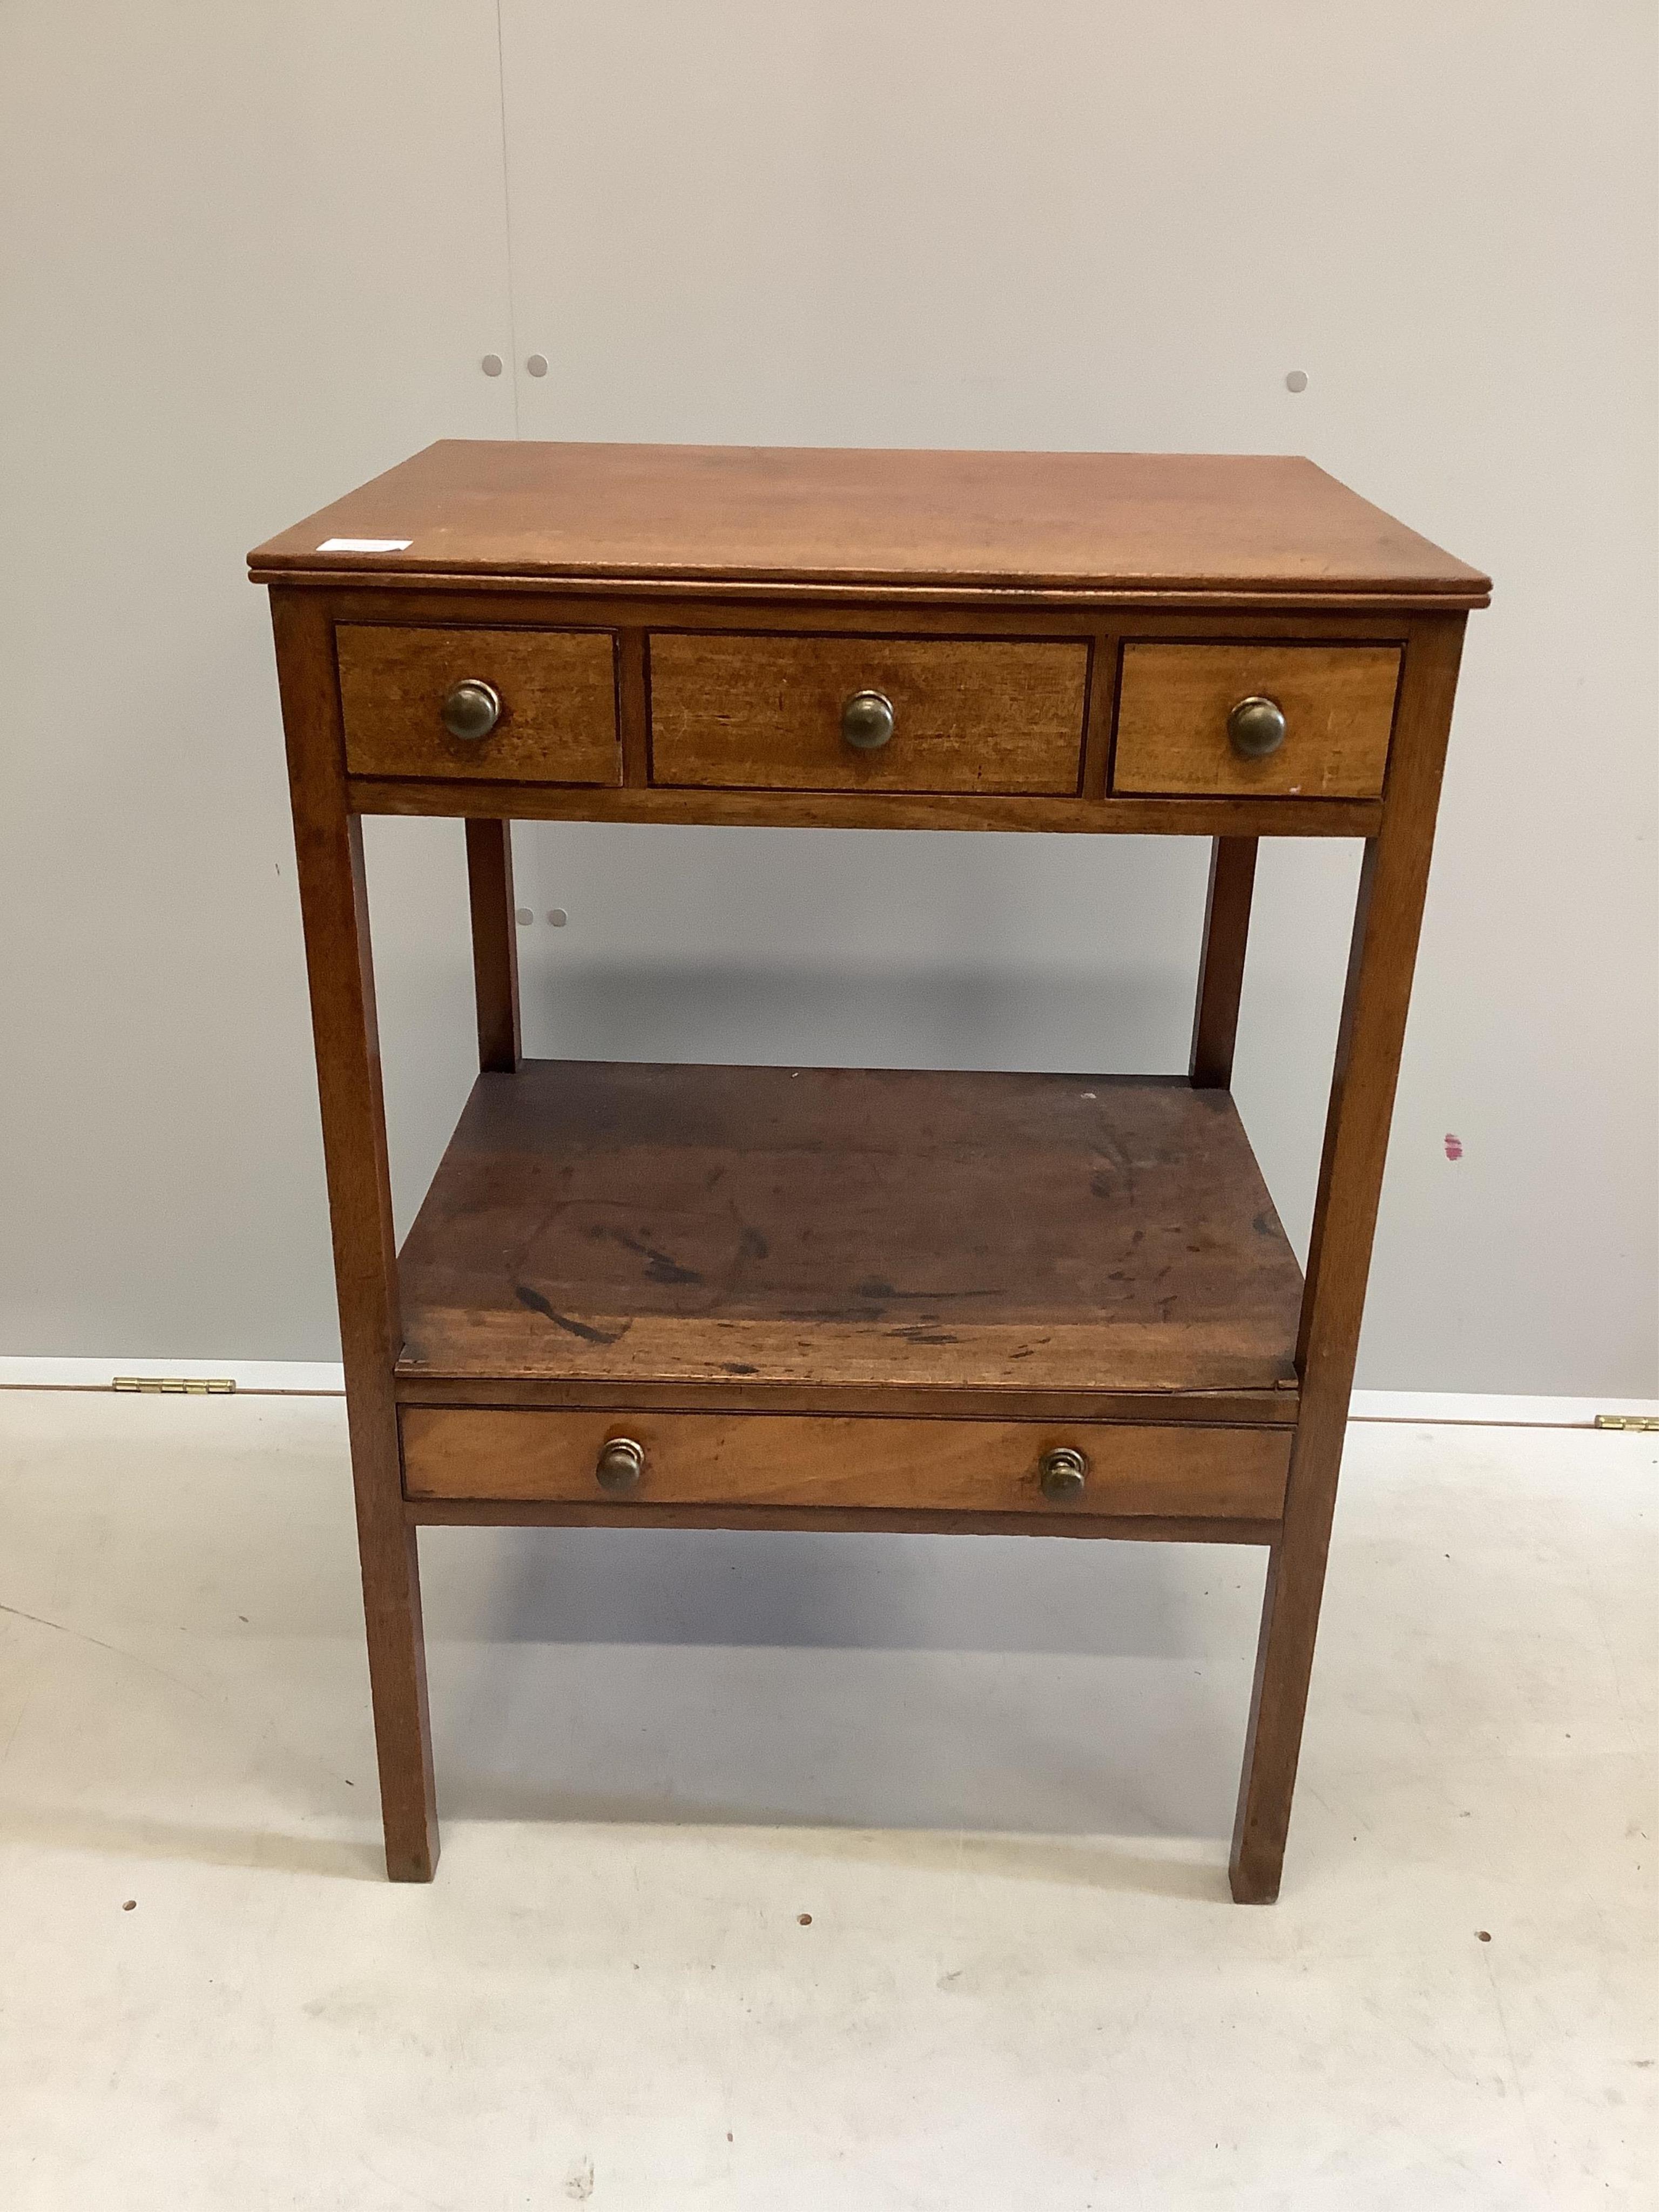 A George III mahogany two tier washstand, width 59cm, depth 46cm, height 85cm. Condition - fair